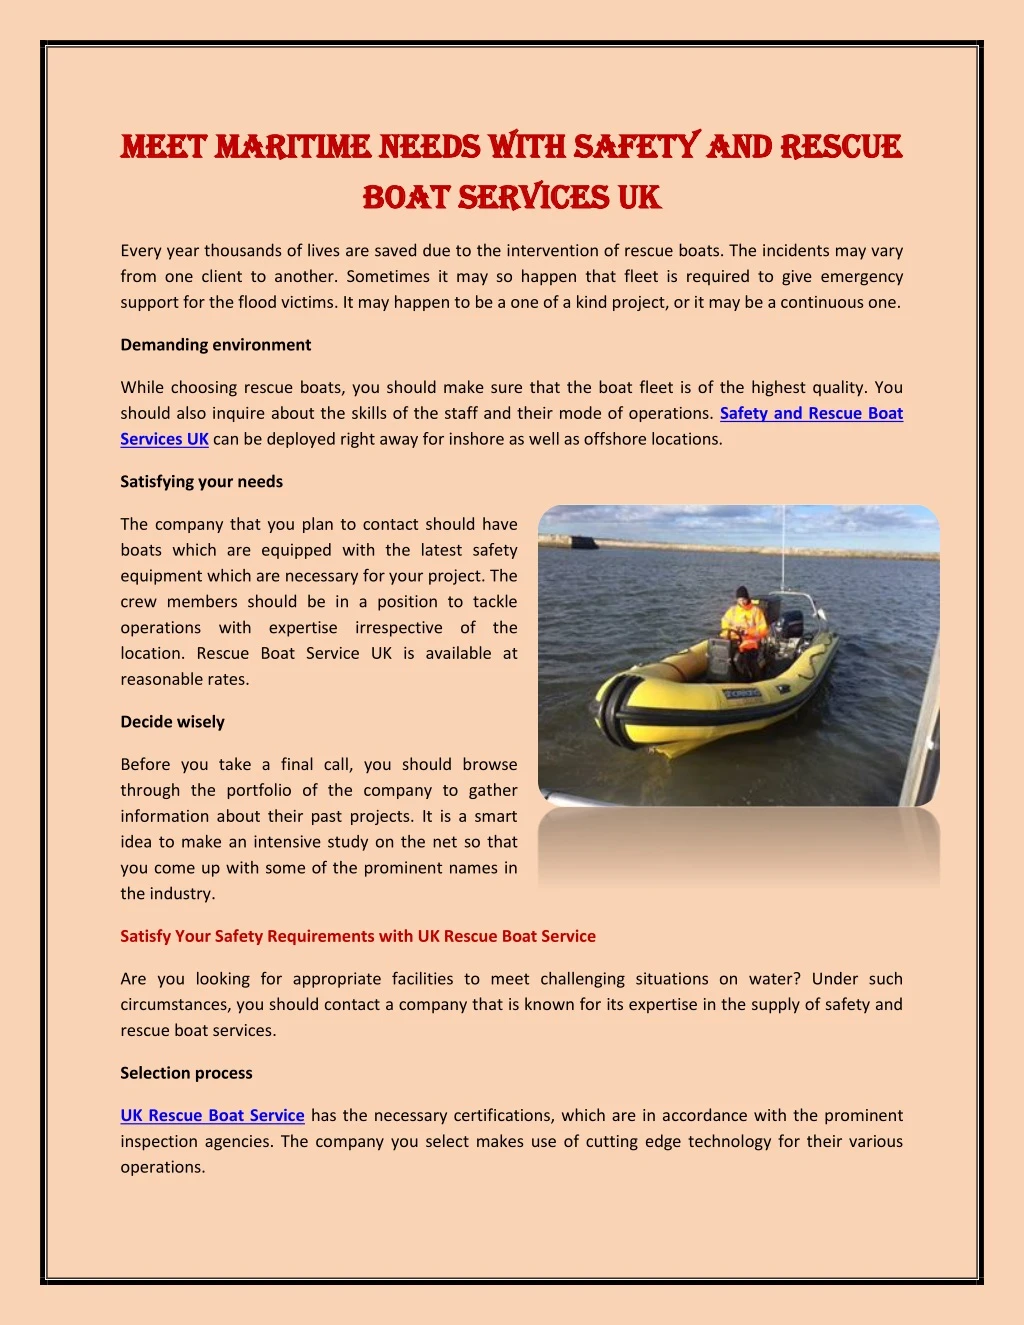 meet maritime needs with safety and rescue meet